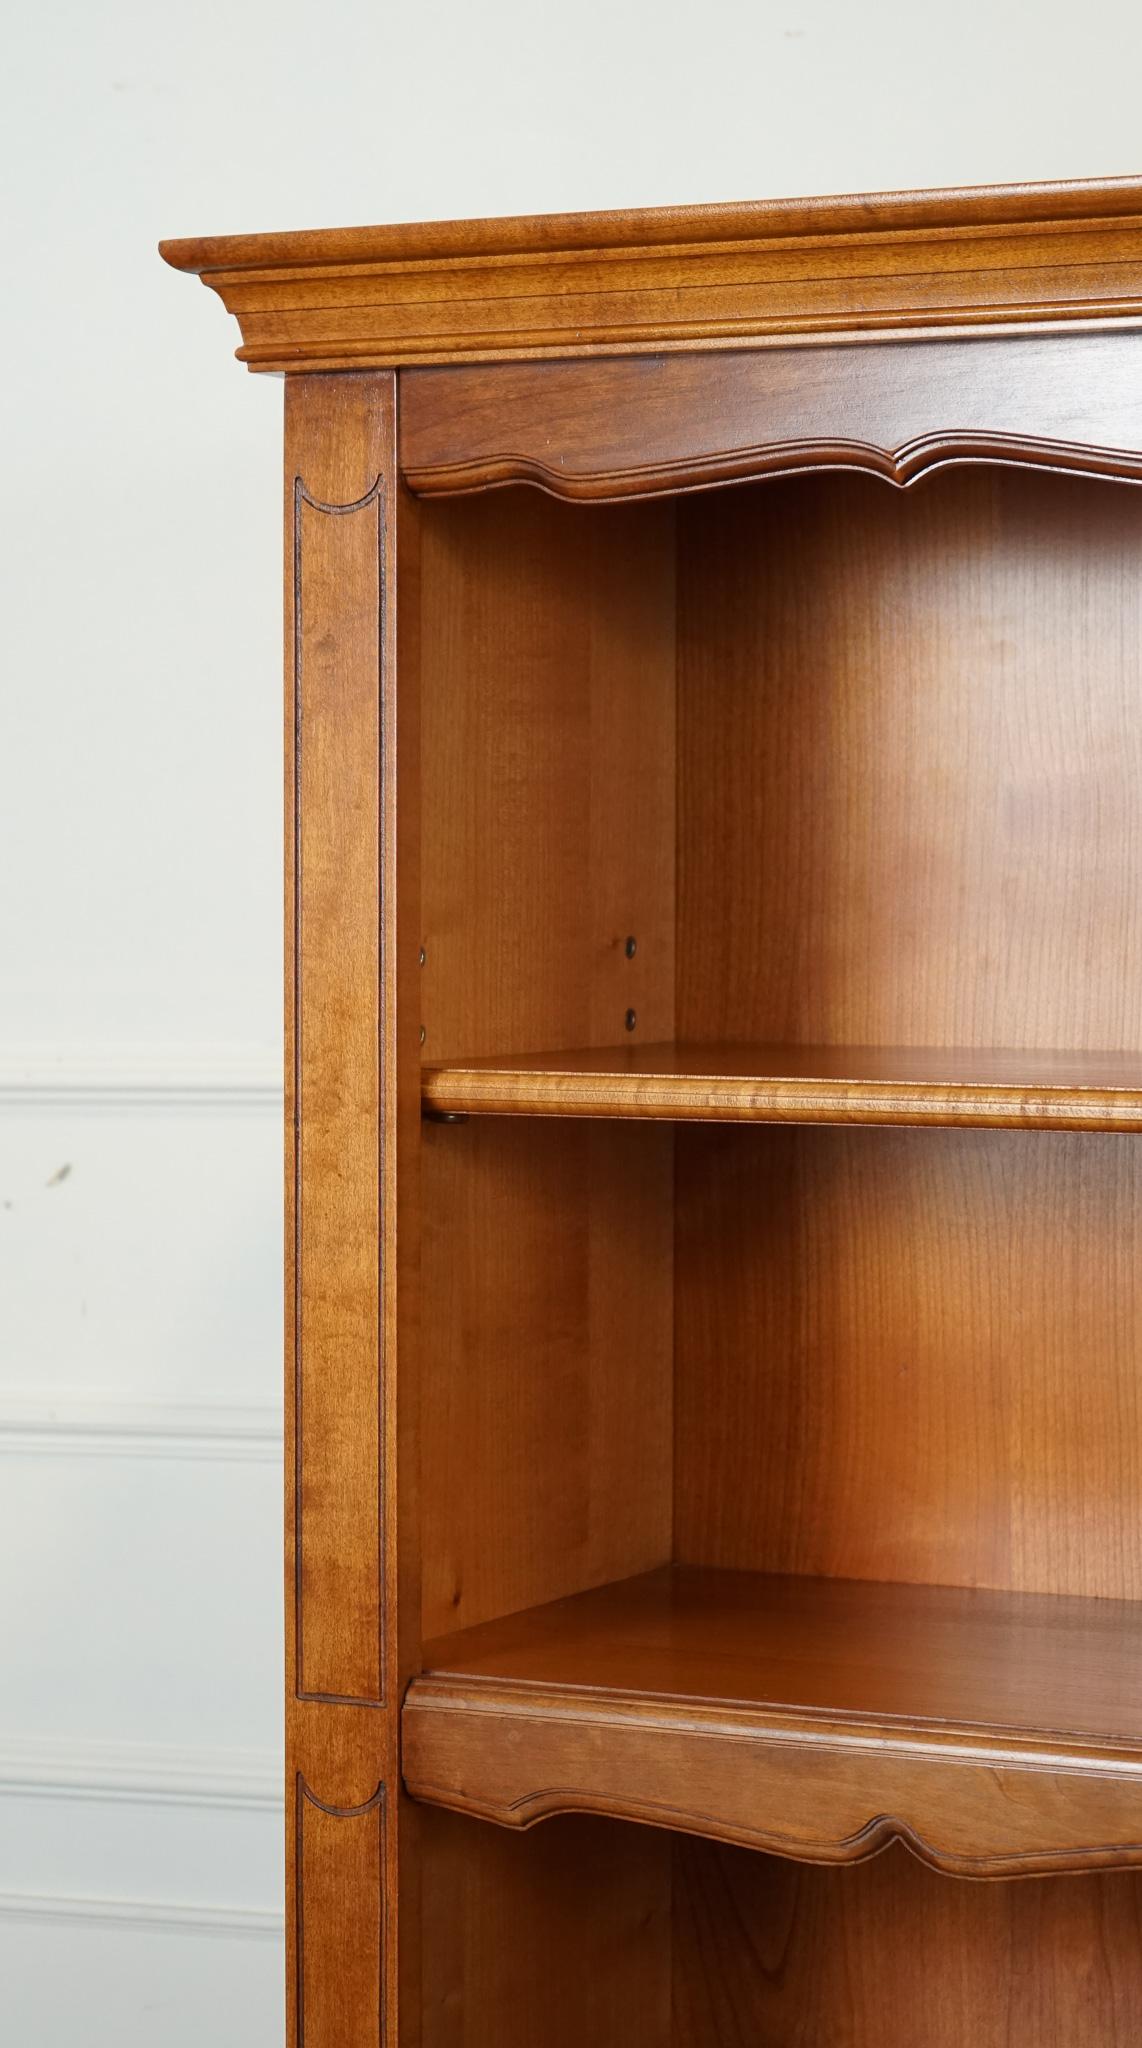 VINTAGE TALL OPEN SOLID BOOKCASE 5 SHELVES MADE BY YOUNGER FURNITURE LONDON j1 For Sale 1